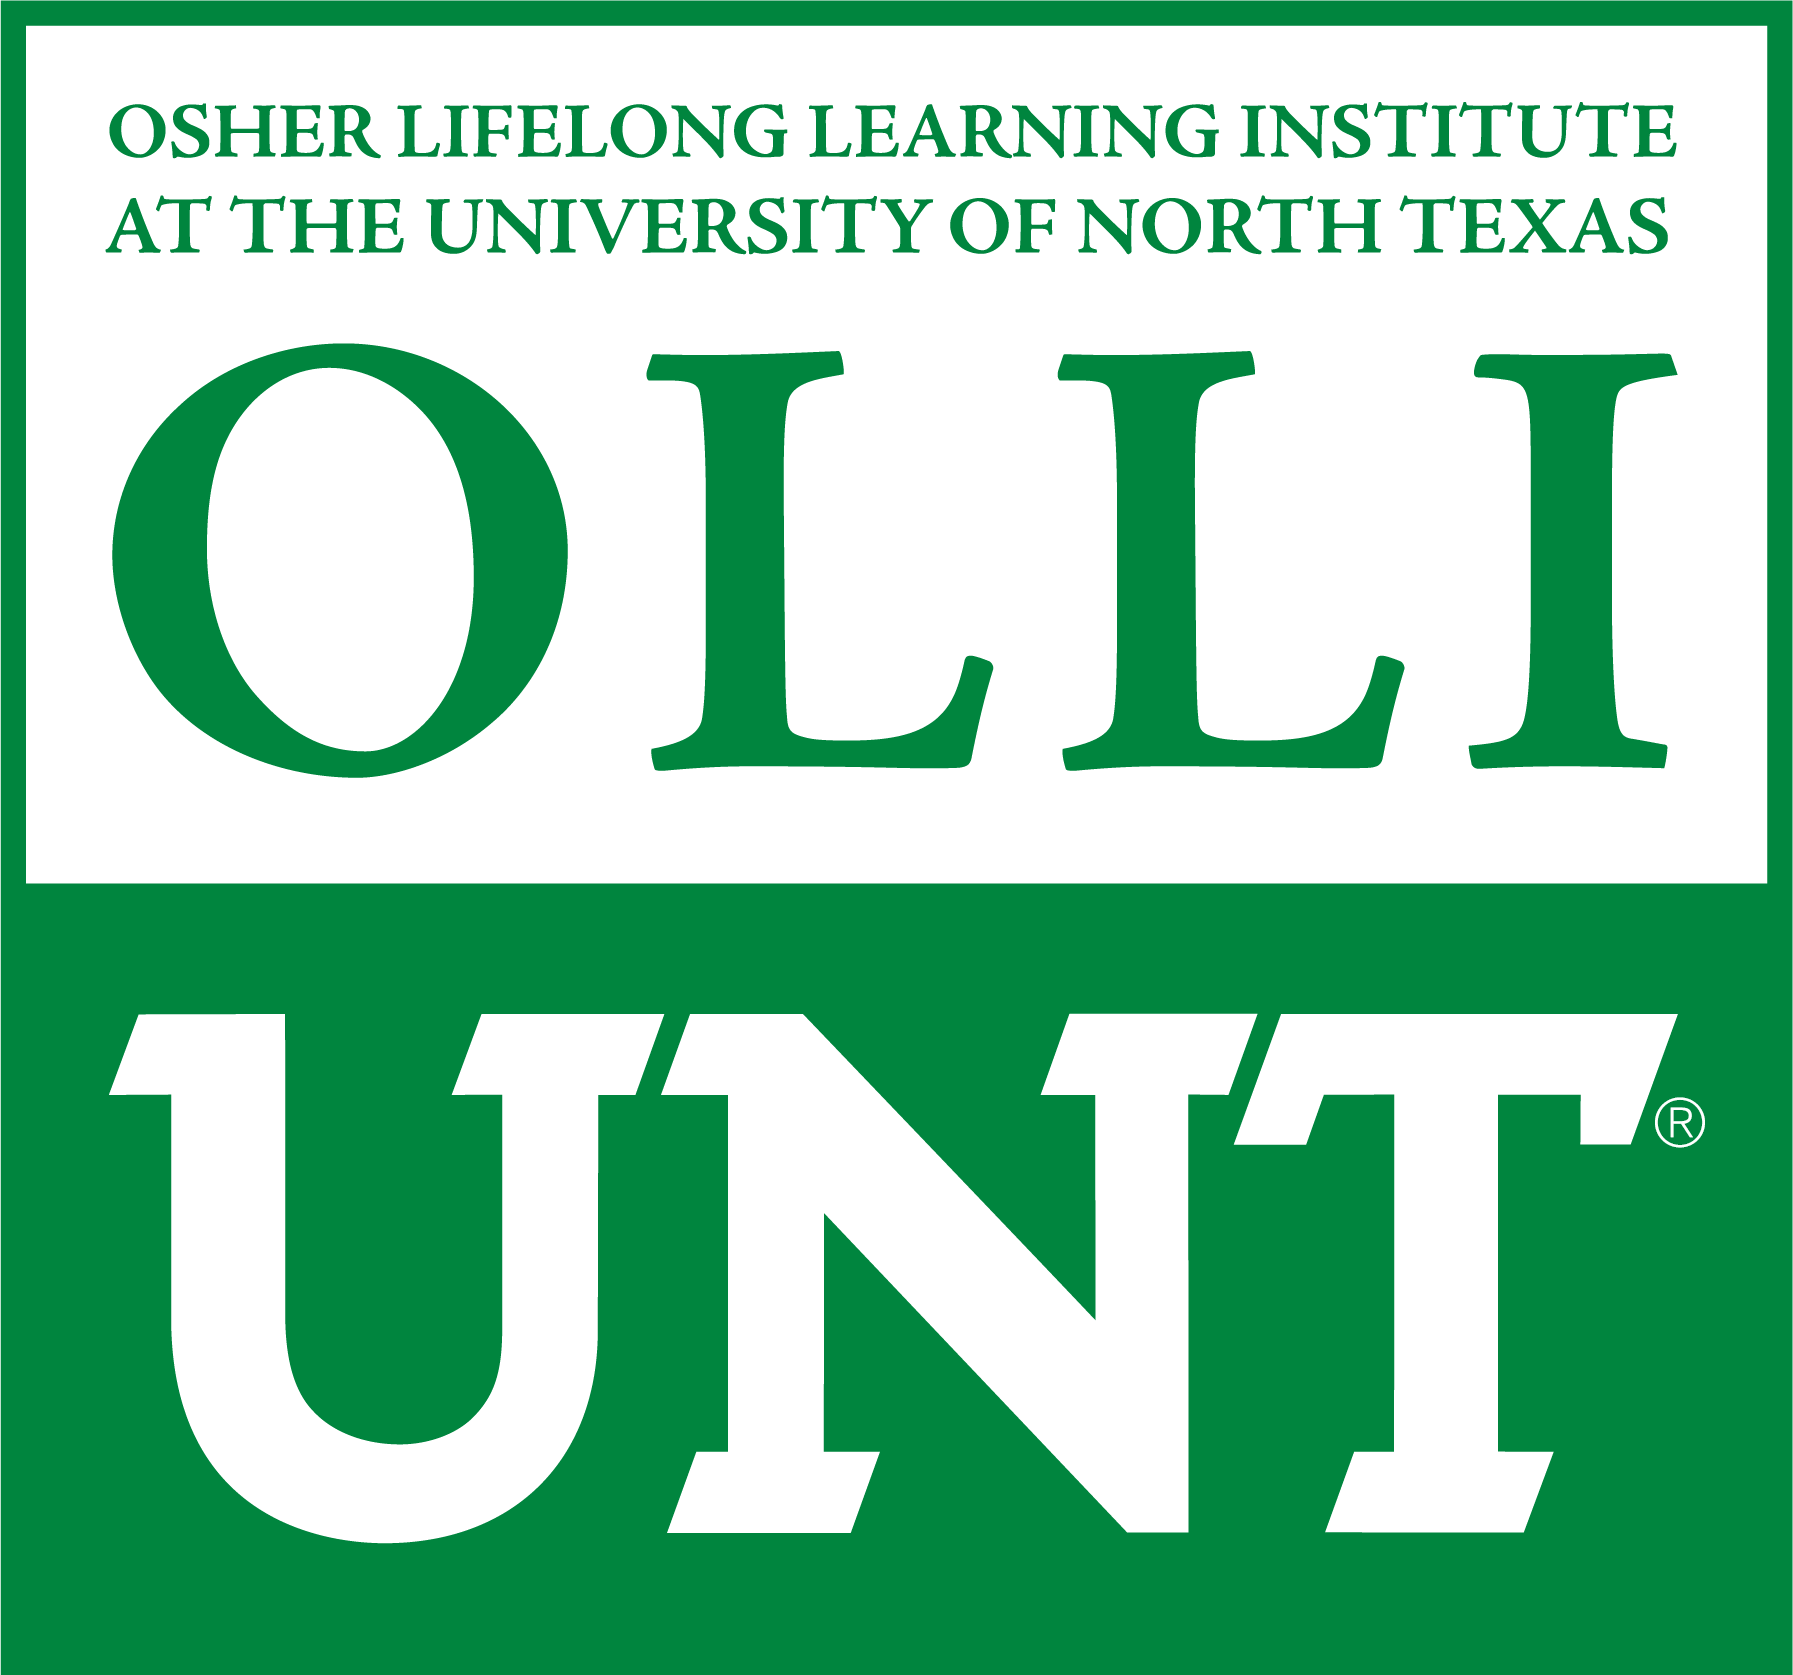 CC Young Senior Living announces new partnership with the Osher Lifelong Learning Institute at the University of North Texas (OLLI at UNT) 